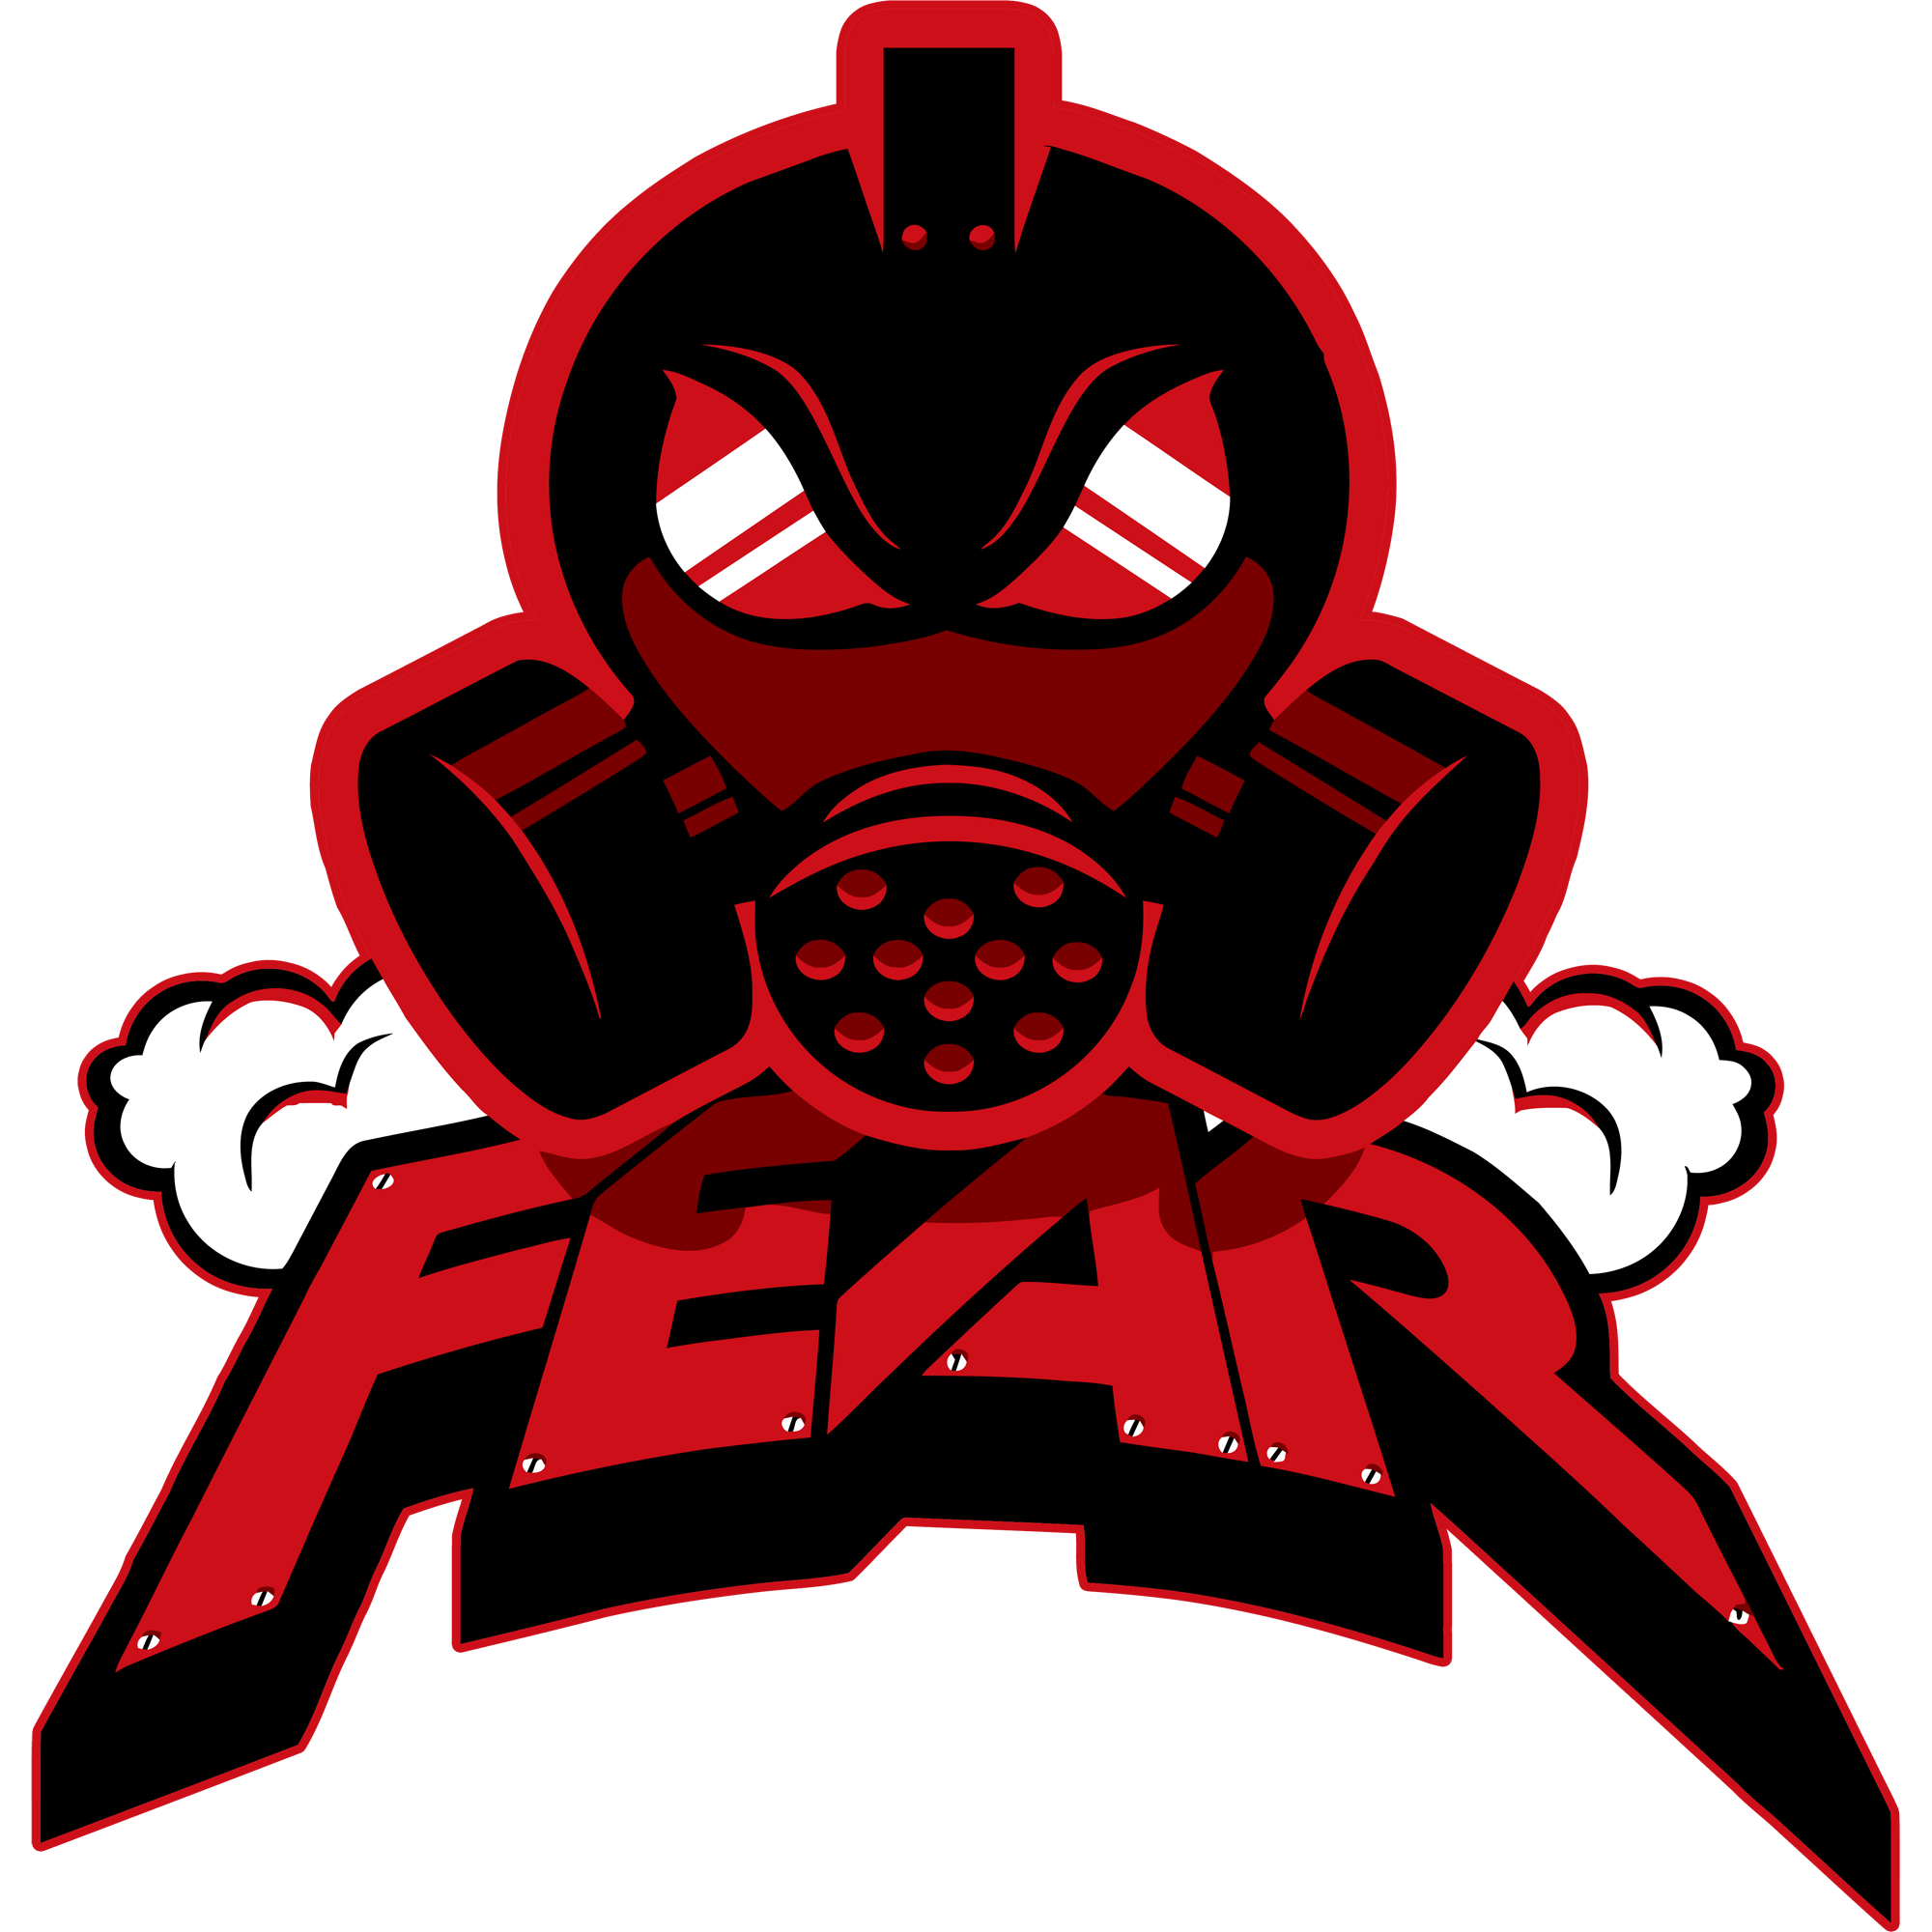 About Fear Scuf Hybridscuf Gaming Logo Wallpaper